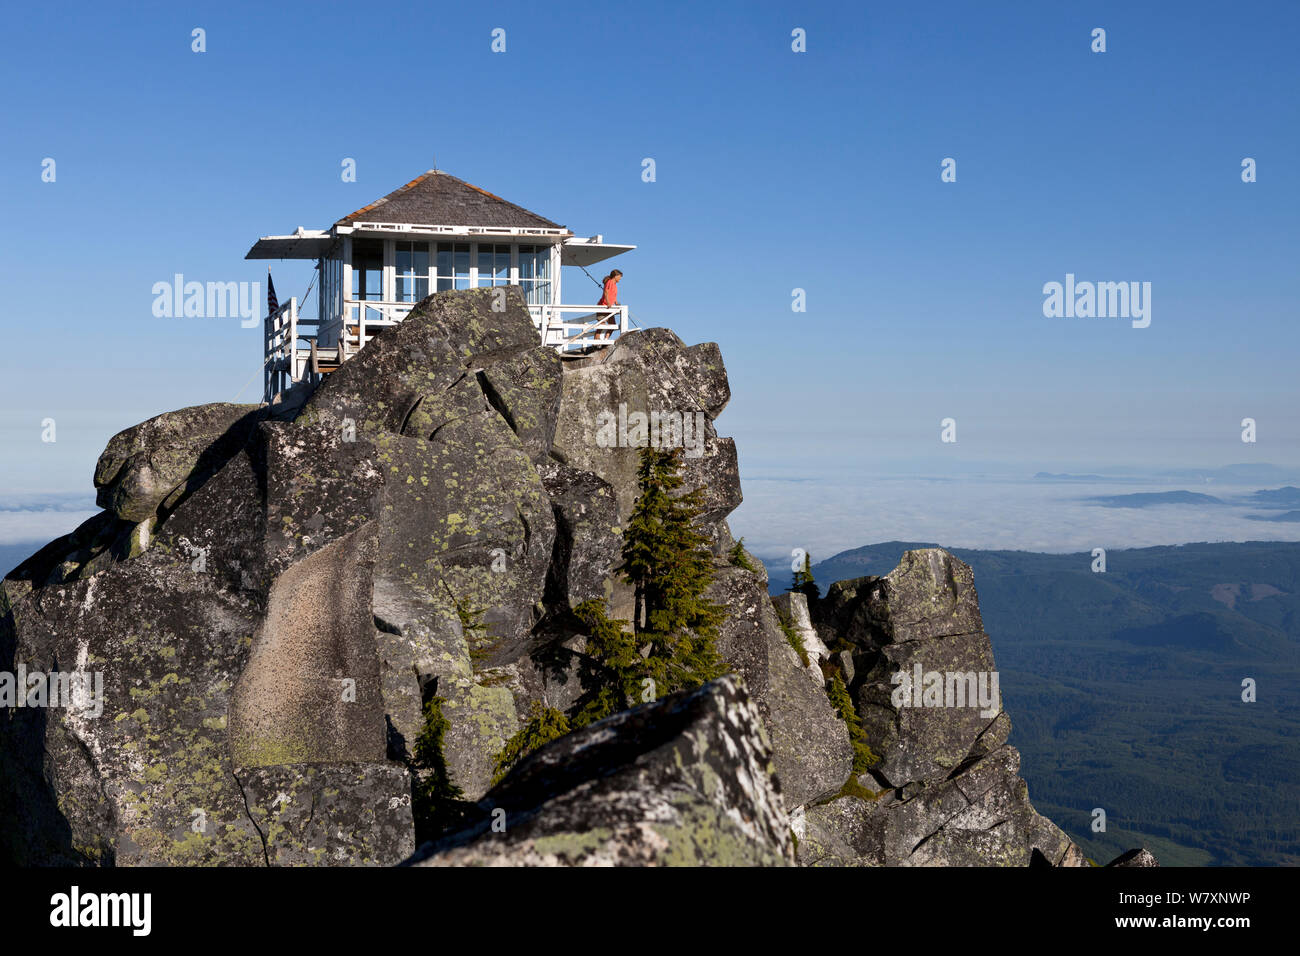 Lookout point on top of Mount Pilchuck, Mount Pilchuck State Park, Cascade Mountains, Washington, USA, July 2014. Model released. Stock Photo